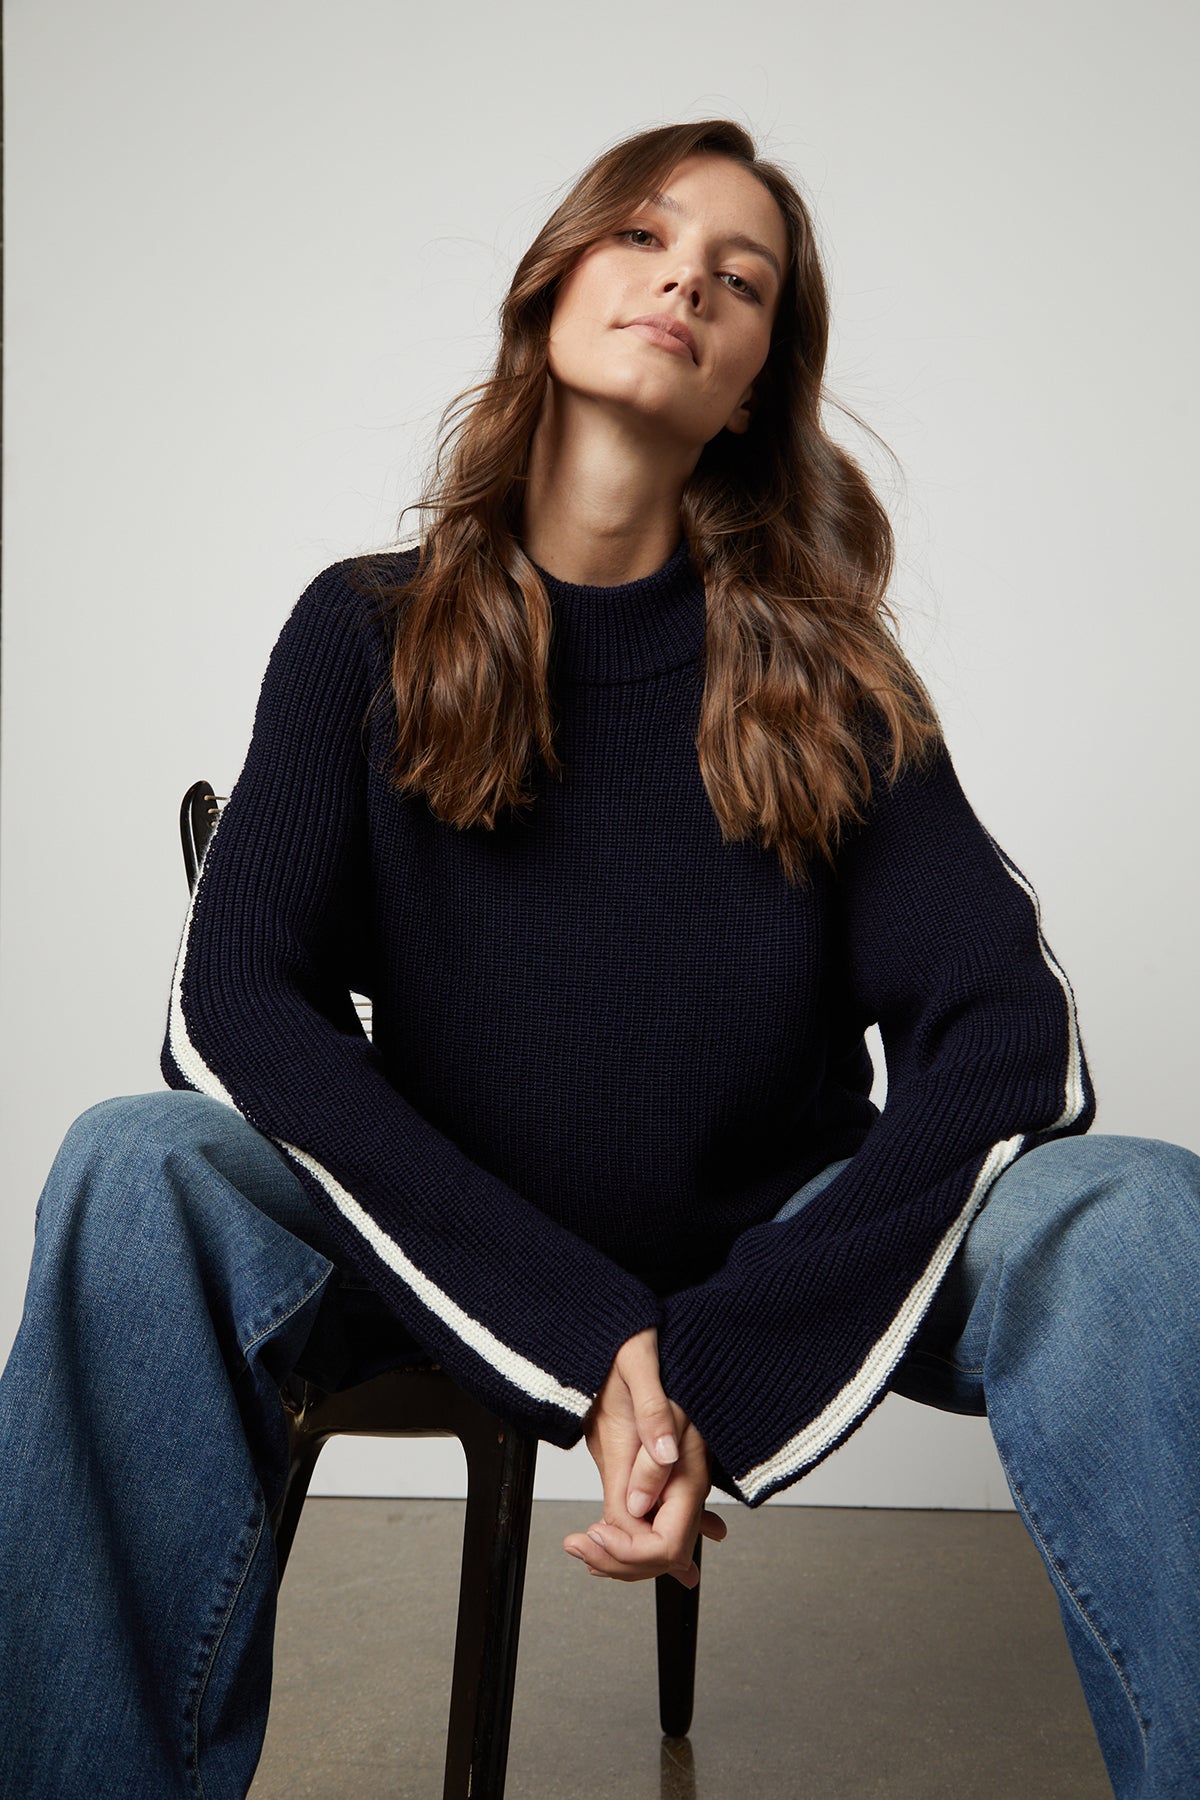 The model is sitting on a chair wearing cozy jeans and a Velvet by Graham & Spencer TEAGAN MOCK NECK SWEATER.-35503460909249